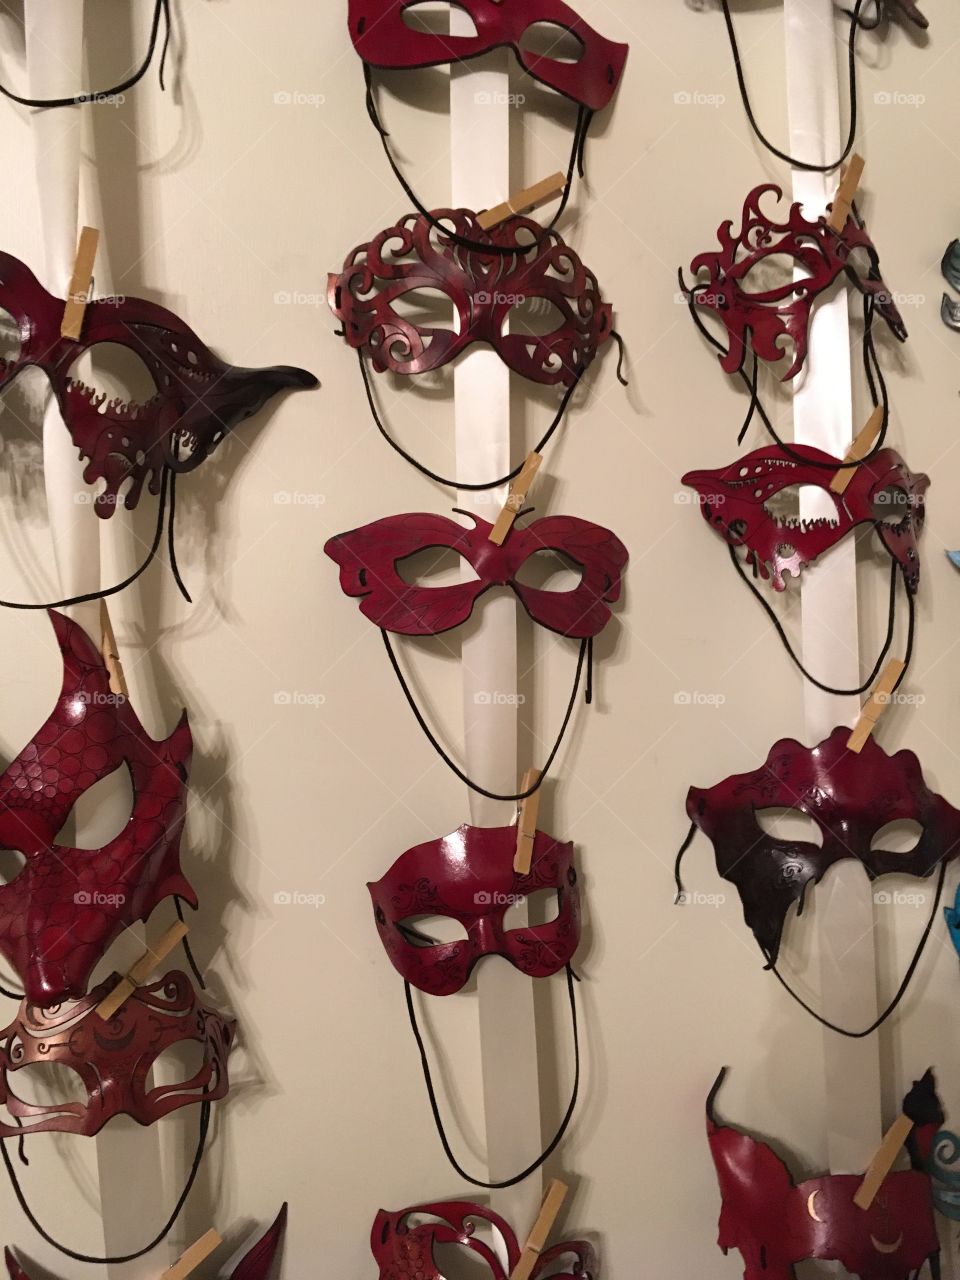 Display of leather masks in red against a white background 